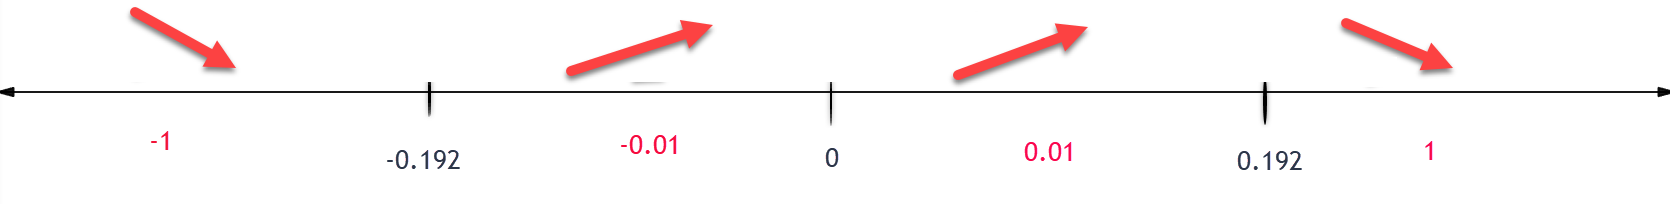 Number line with critical values and partitions marked on the x-axis.  Critical values are -0.192 and 0.192.  the partition is at 0.  Test values are also labeled on the number line:  -1, -0.01, 0.01, and 1.  There are arrows above the number line indicating where the graph is increasing and decreasing.  The arrows are pointing Down in the intervals from negative infinity to -0.192 and from 0.192 to infinity.  The arrows are pointing up on the intervals from -0.192 to 0 and 0 to 0.192.